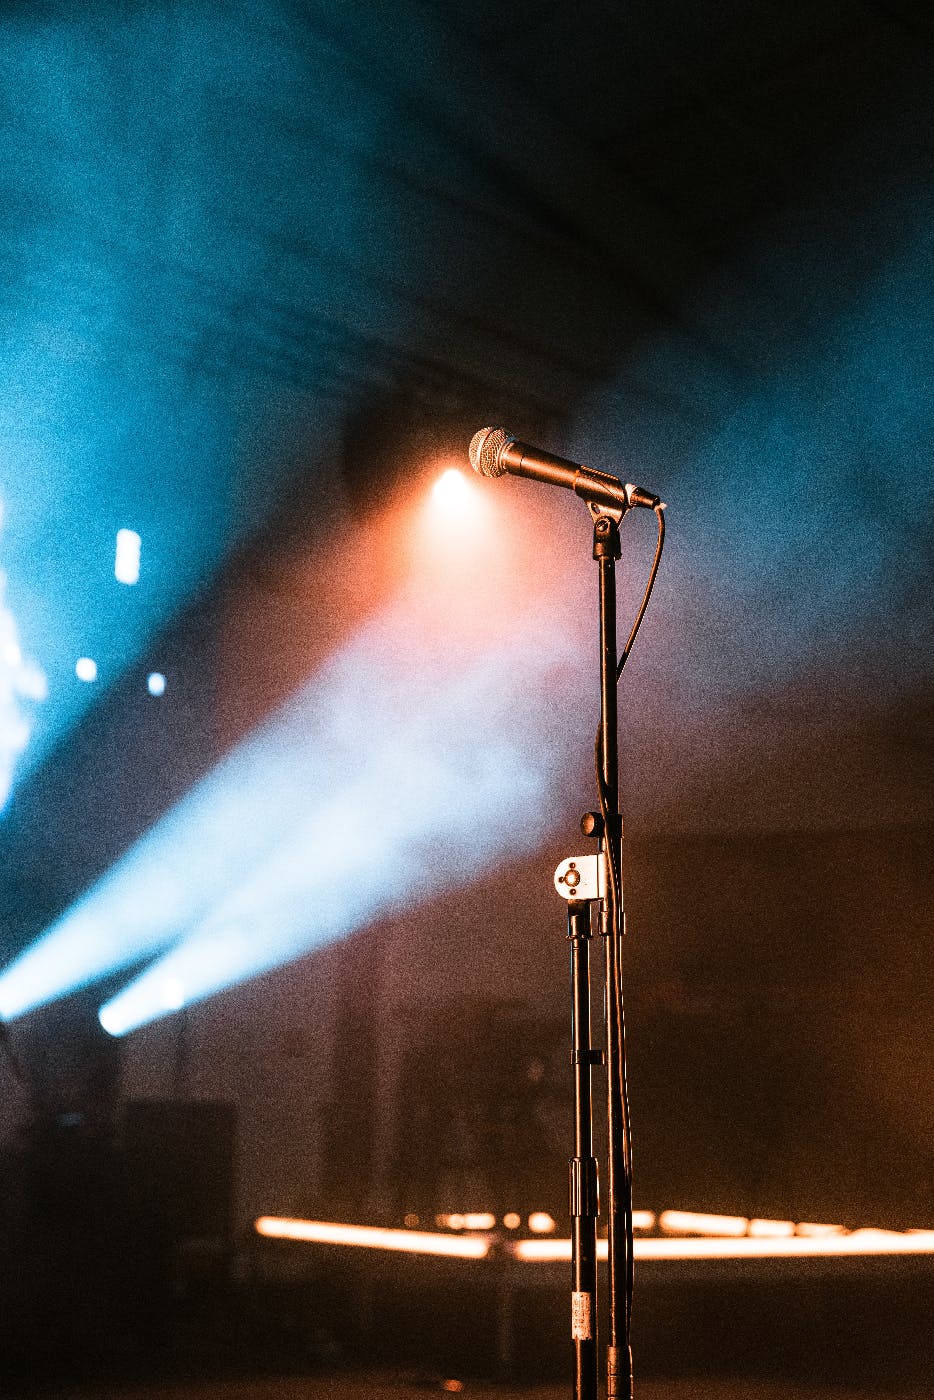 A mic on a stand in spotlights